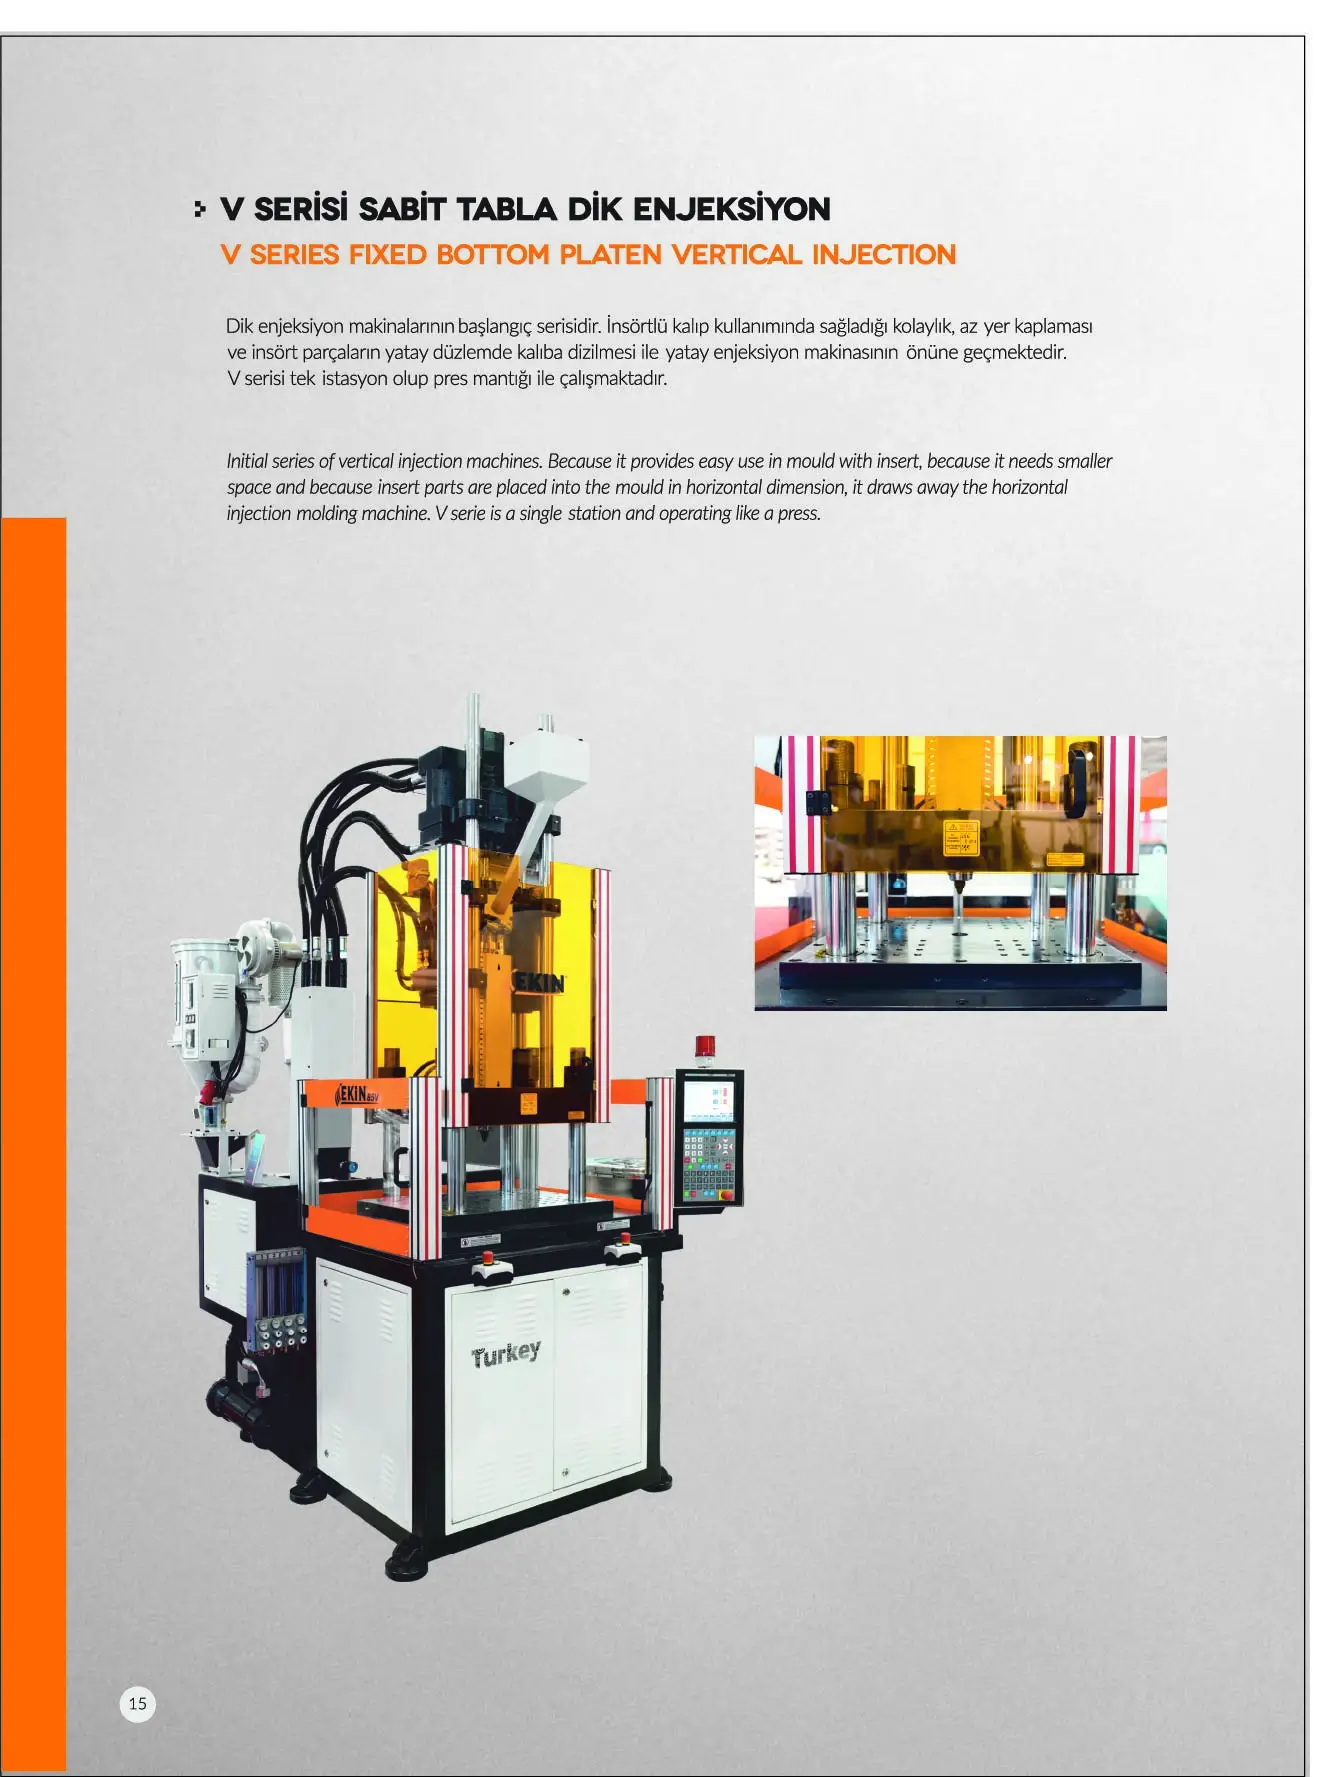 Ekin 55v 2s Two Station Sliding Table Vertical Plastic Injection Moulding Machine Made In Turkey Buy Injection Moulding Machine Vertical Injection Moulding Rubber Injection Moulding Machine Product On Alibaba Com